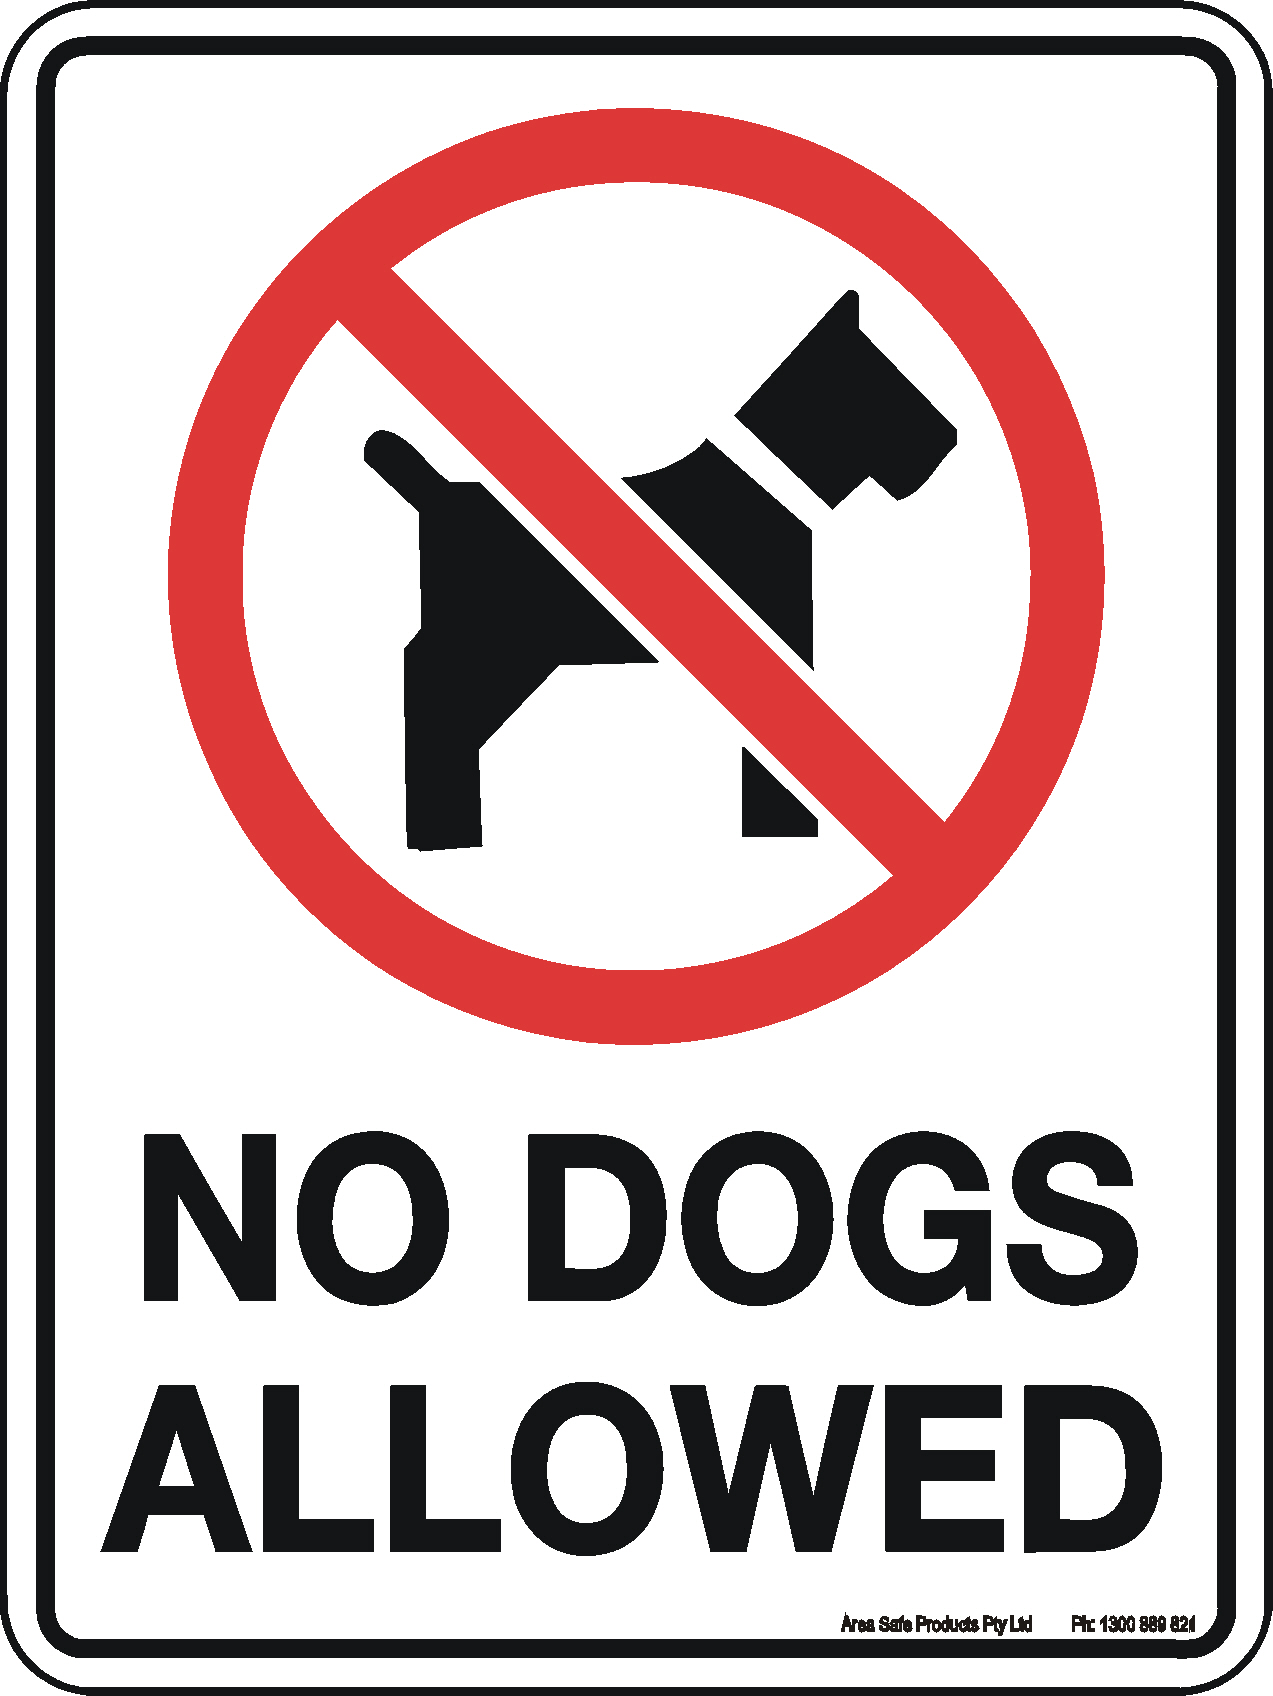 Not allowed speed. No Dogs allowed. No Dogs allowed sign. Знак Russians and Dogs are not allowed. Not allowed Dog.